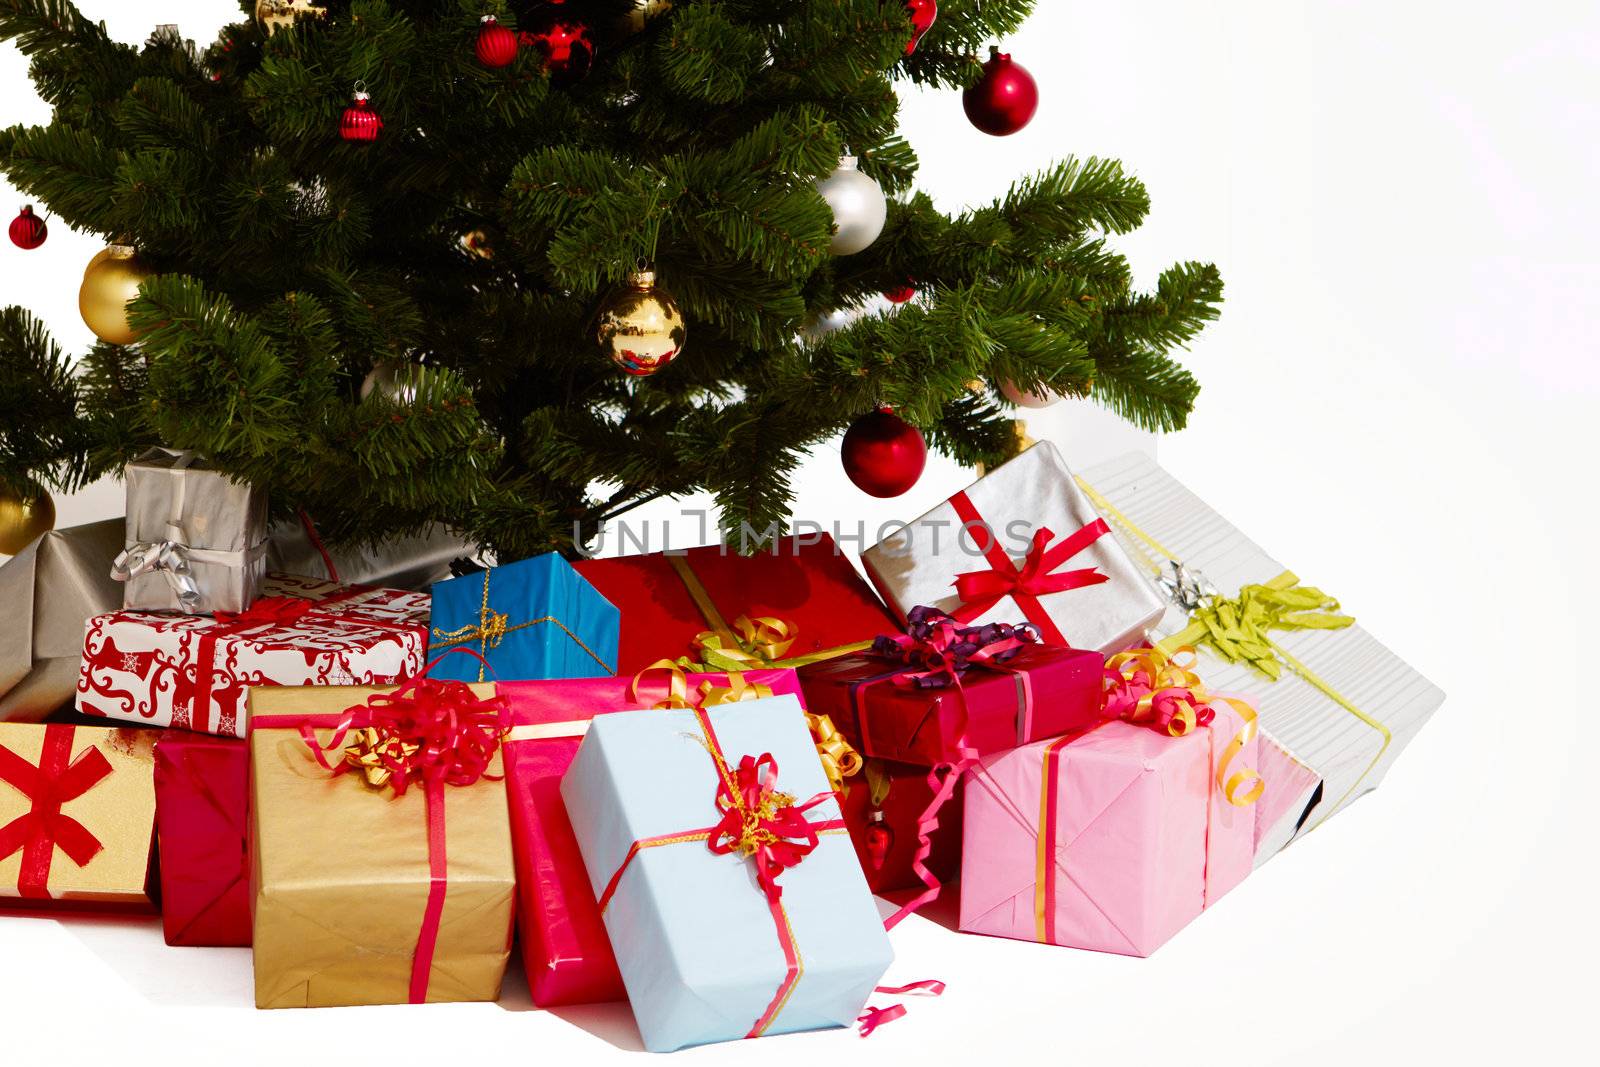 Christmas - Presents under a tree on white background